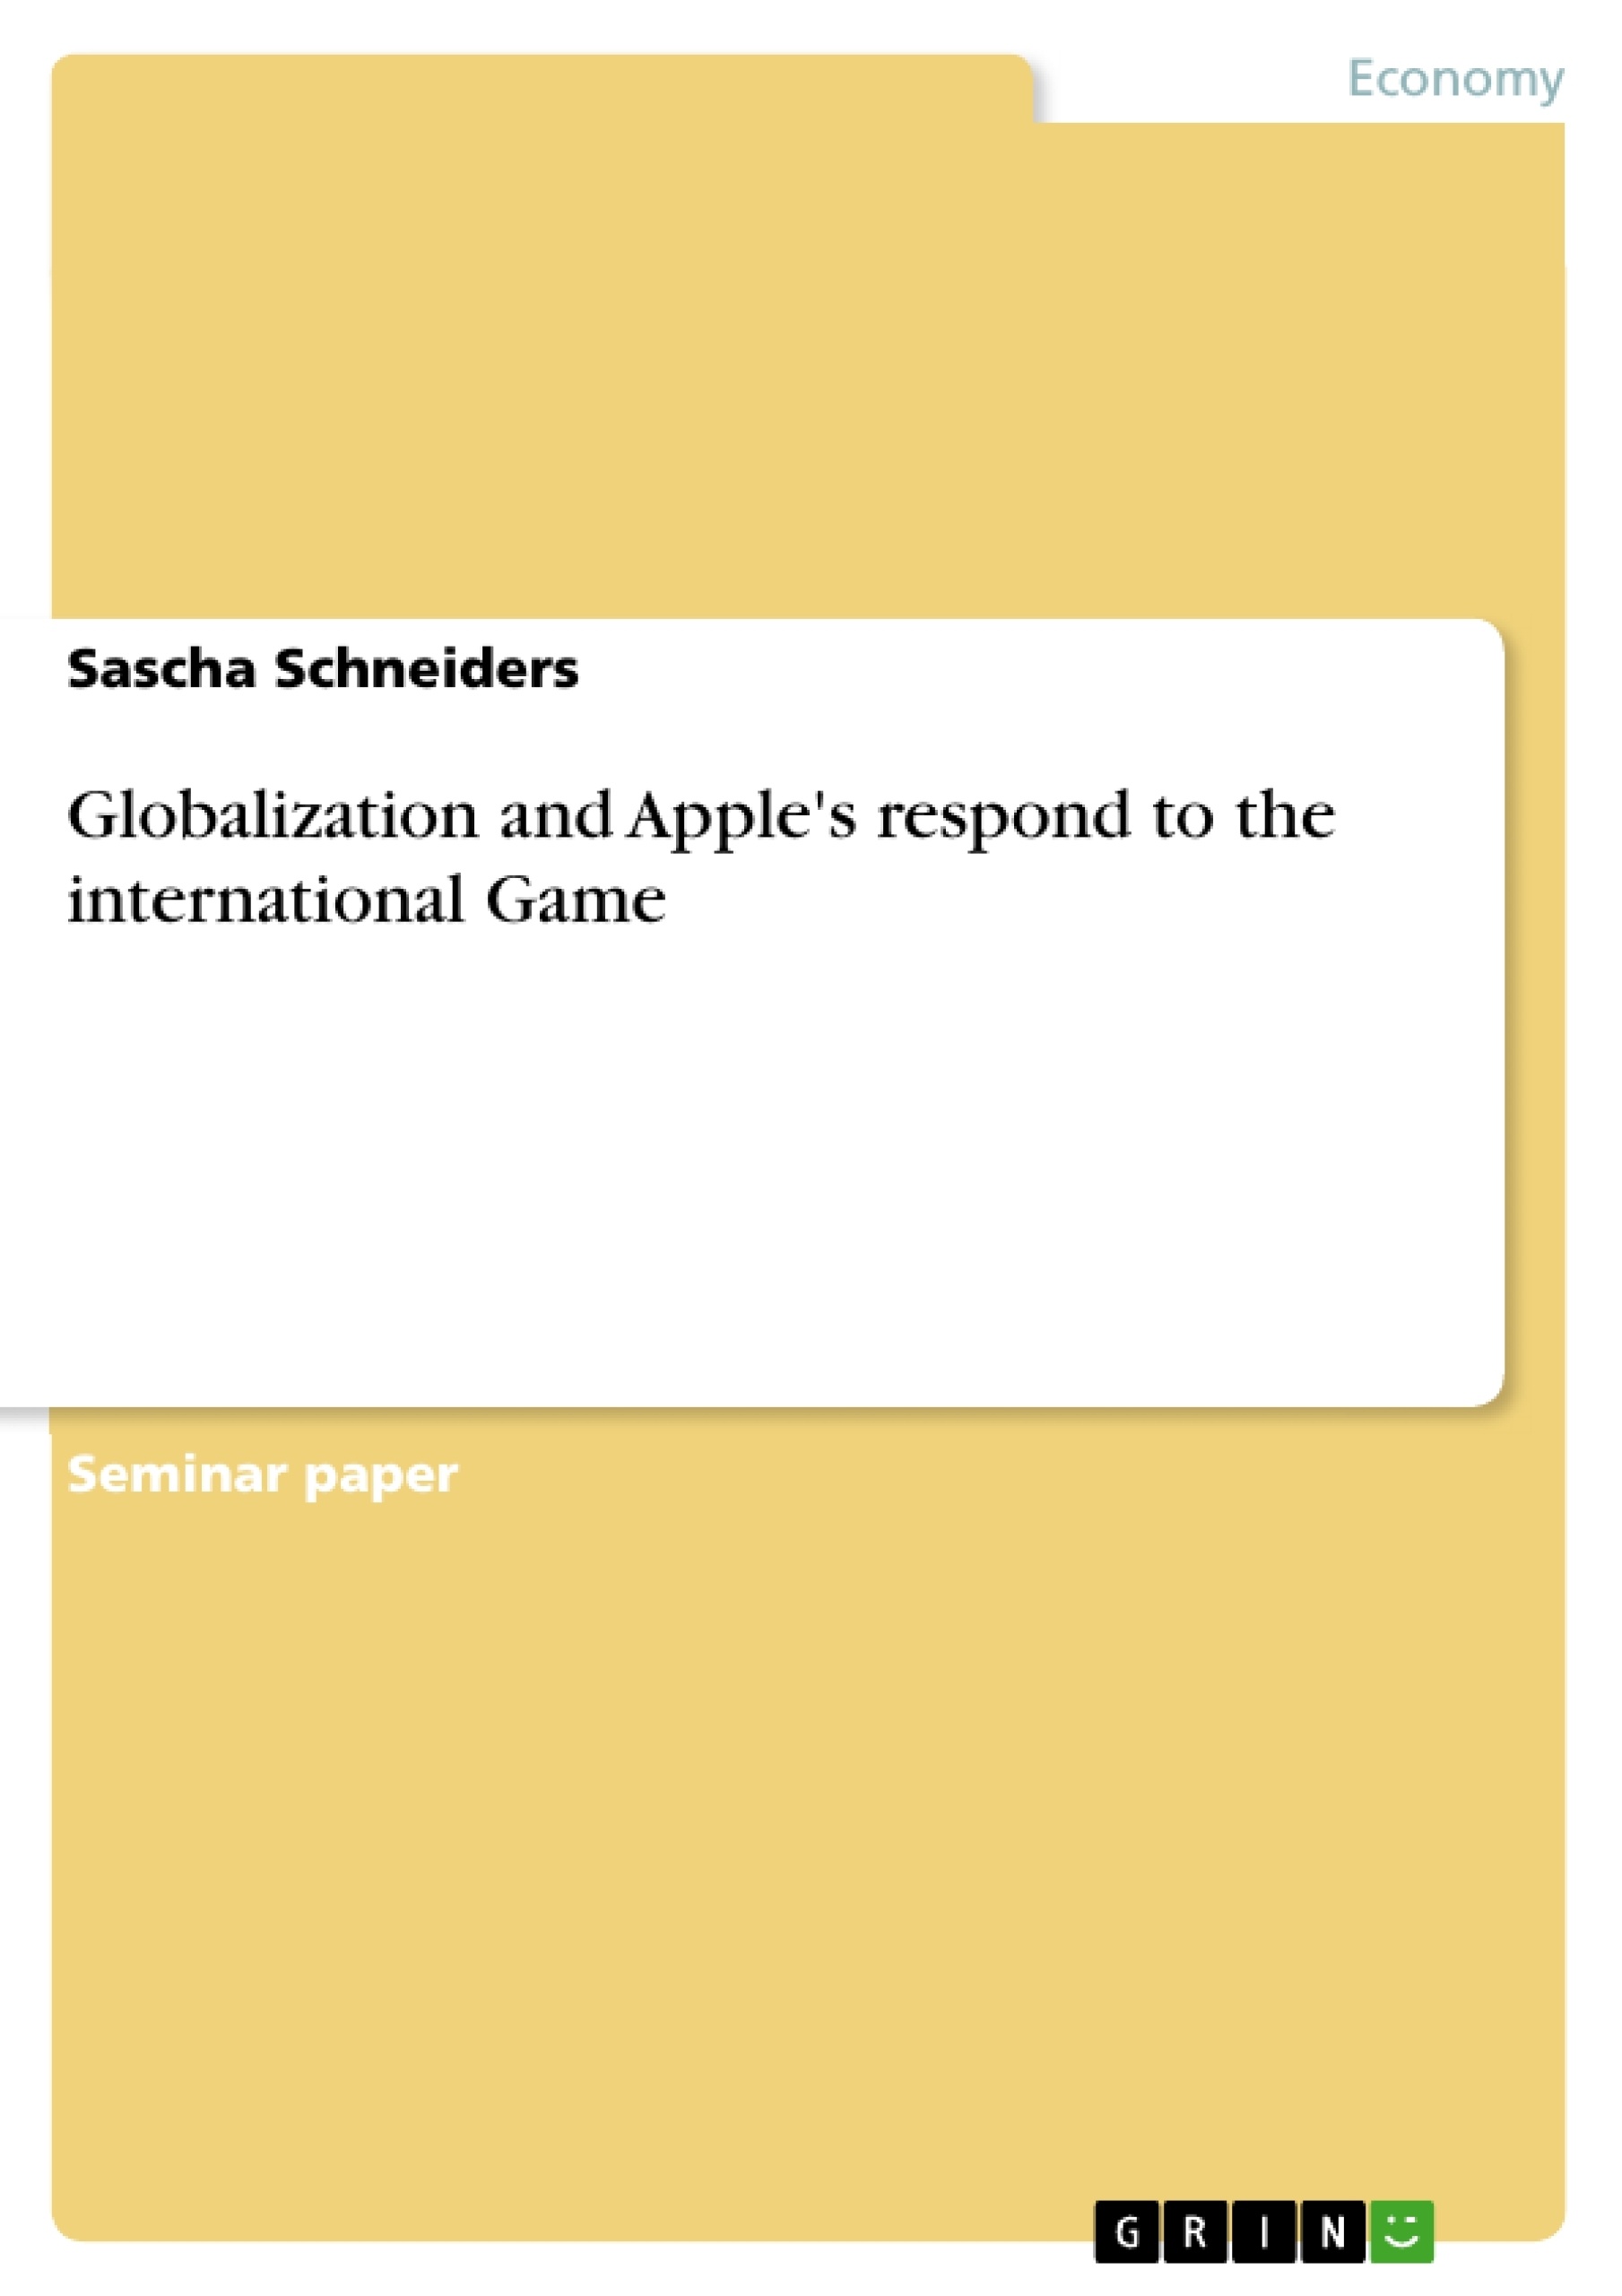 Title: Globalization and Apple's respond to the international Game